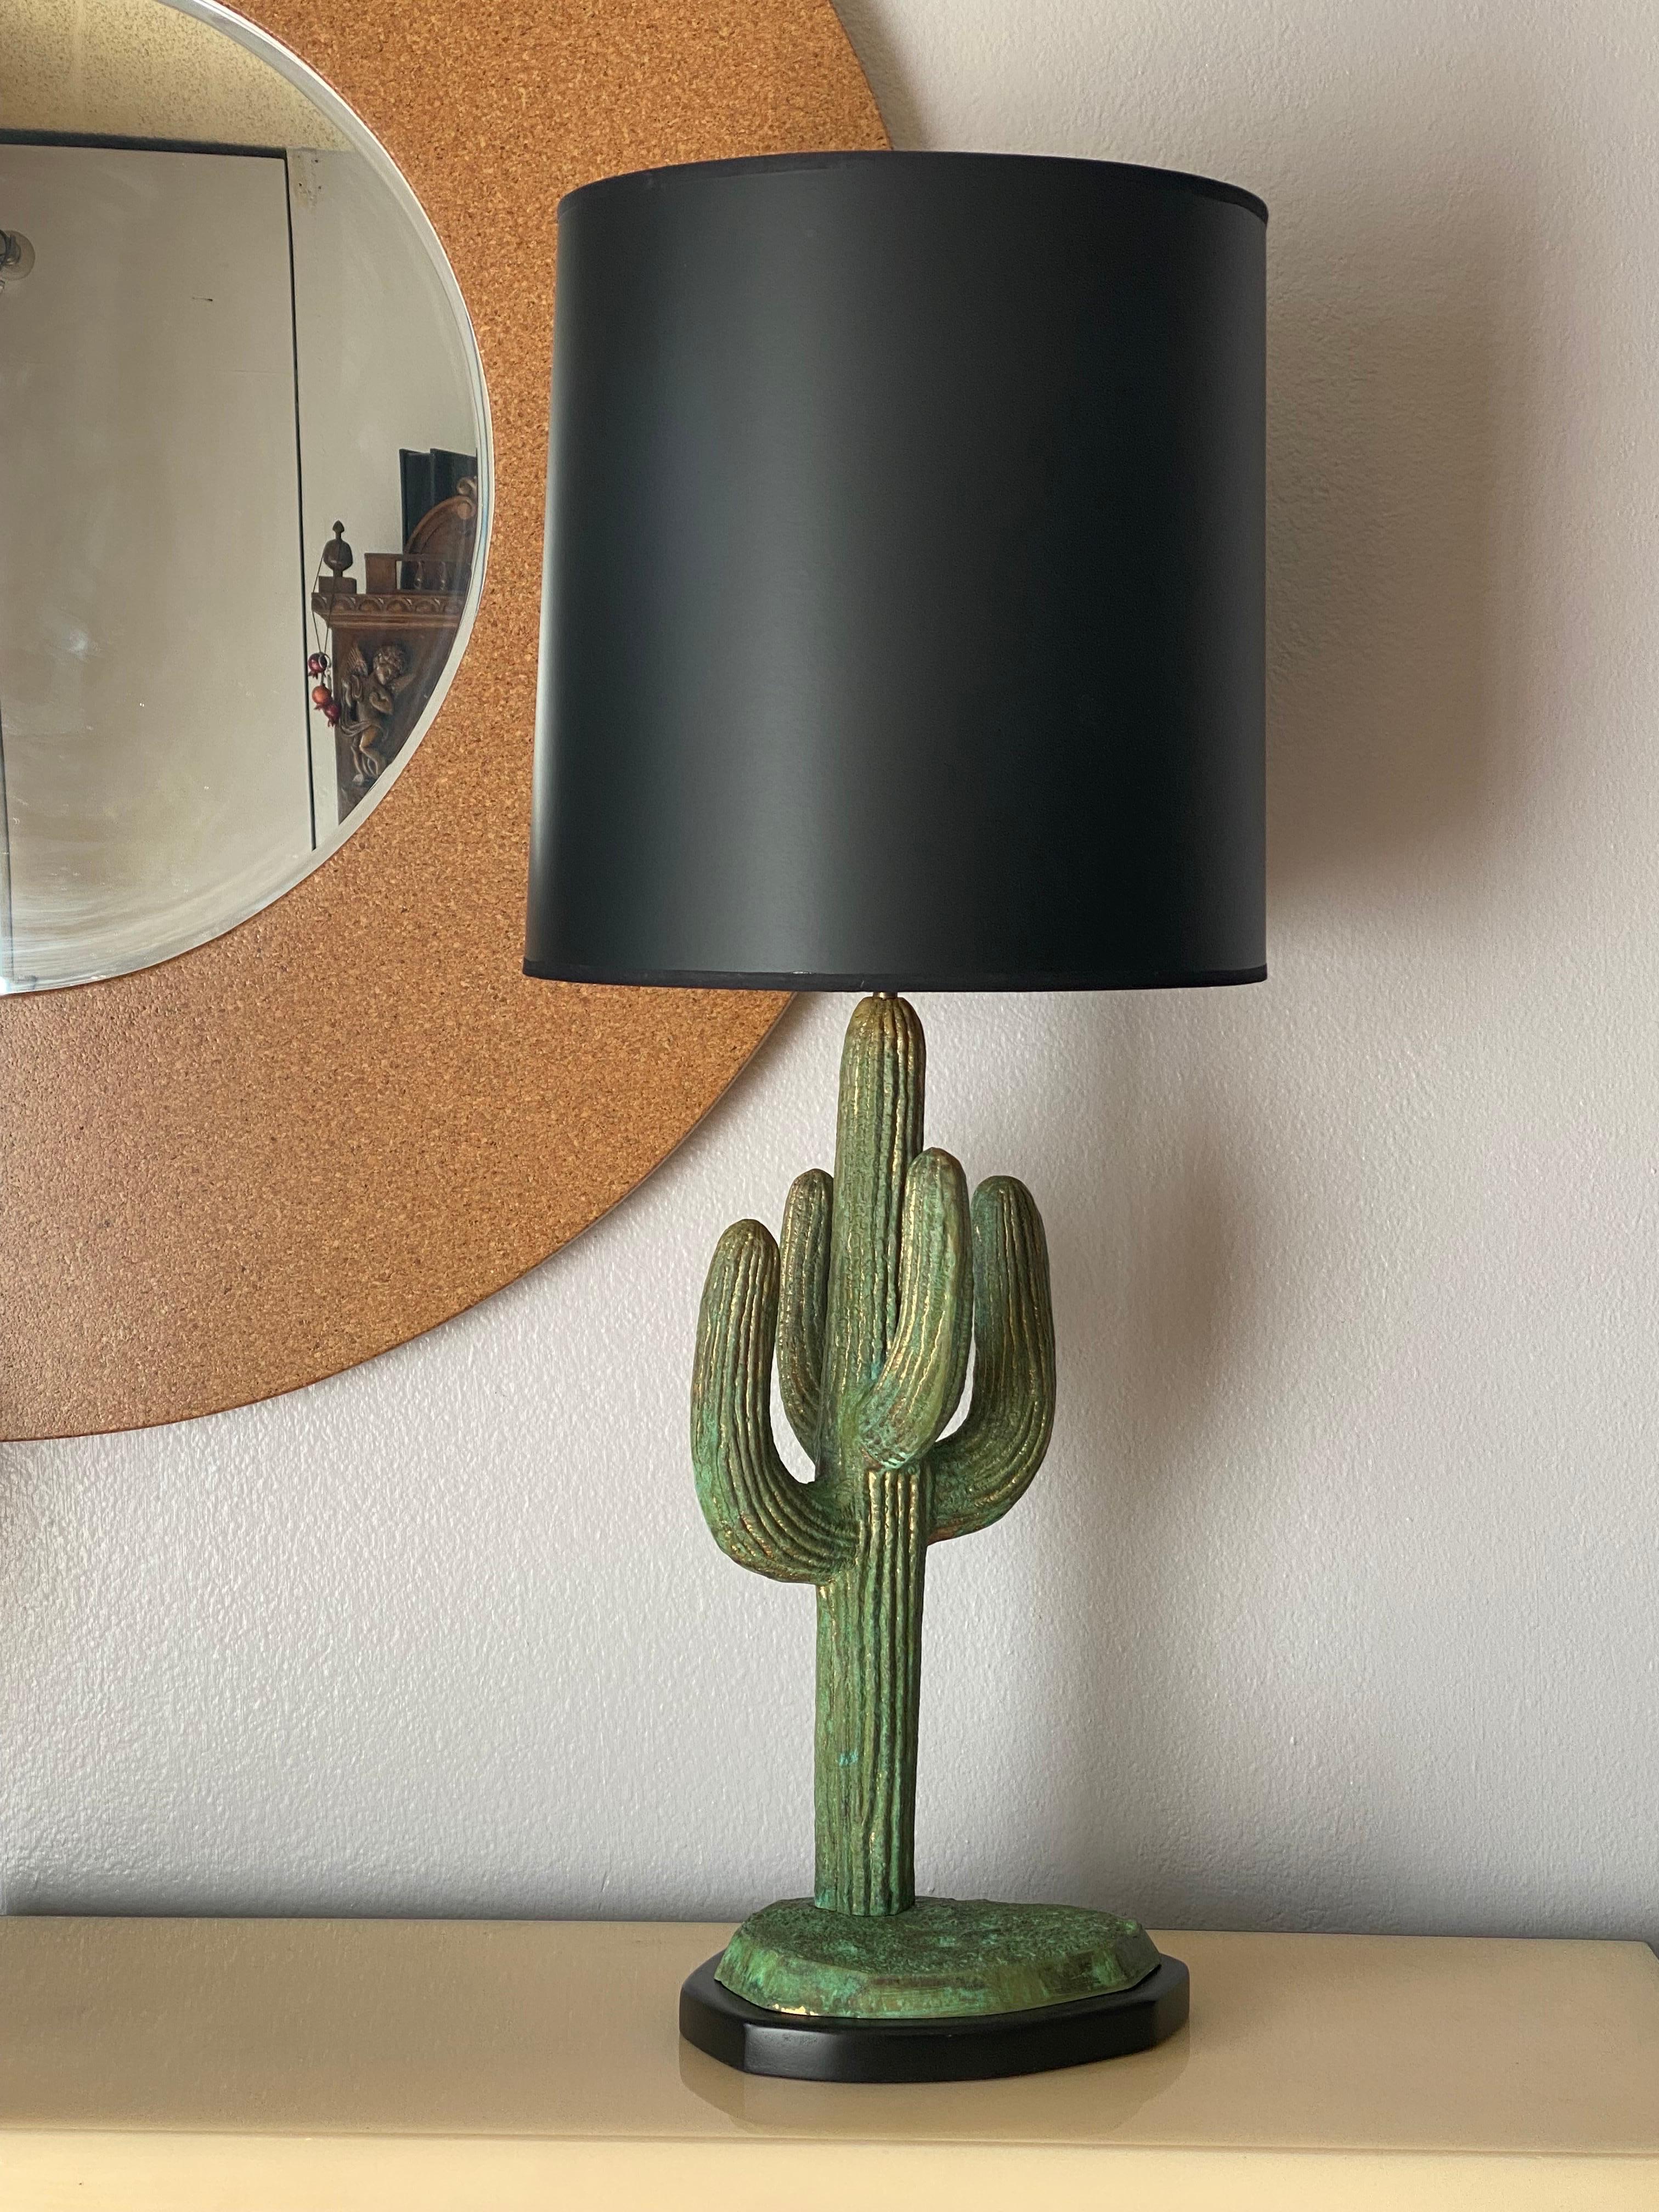 Brass Saguaro cactus lamp in green verdigris patina. Lampshade is NOT included. Total height is 32